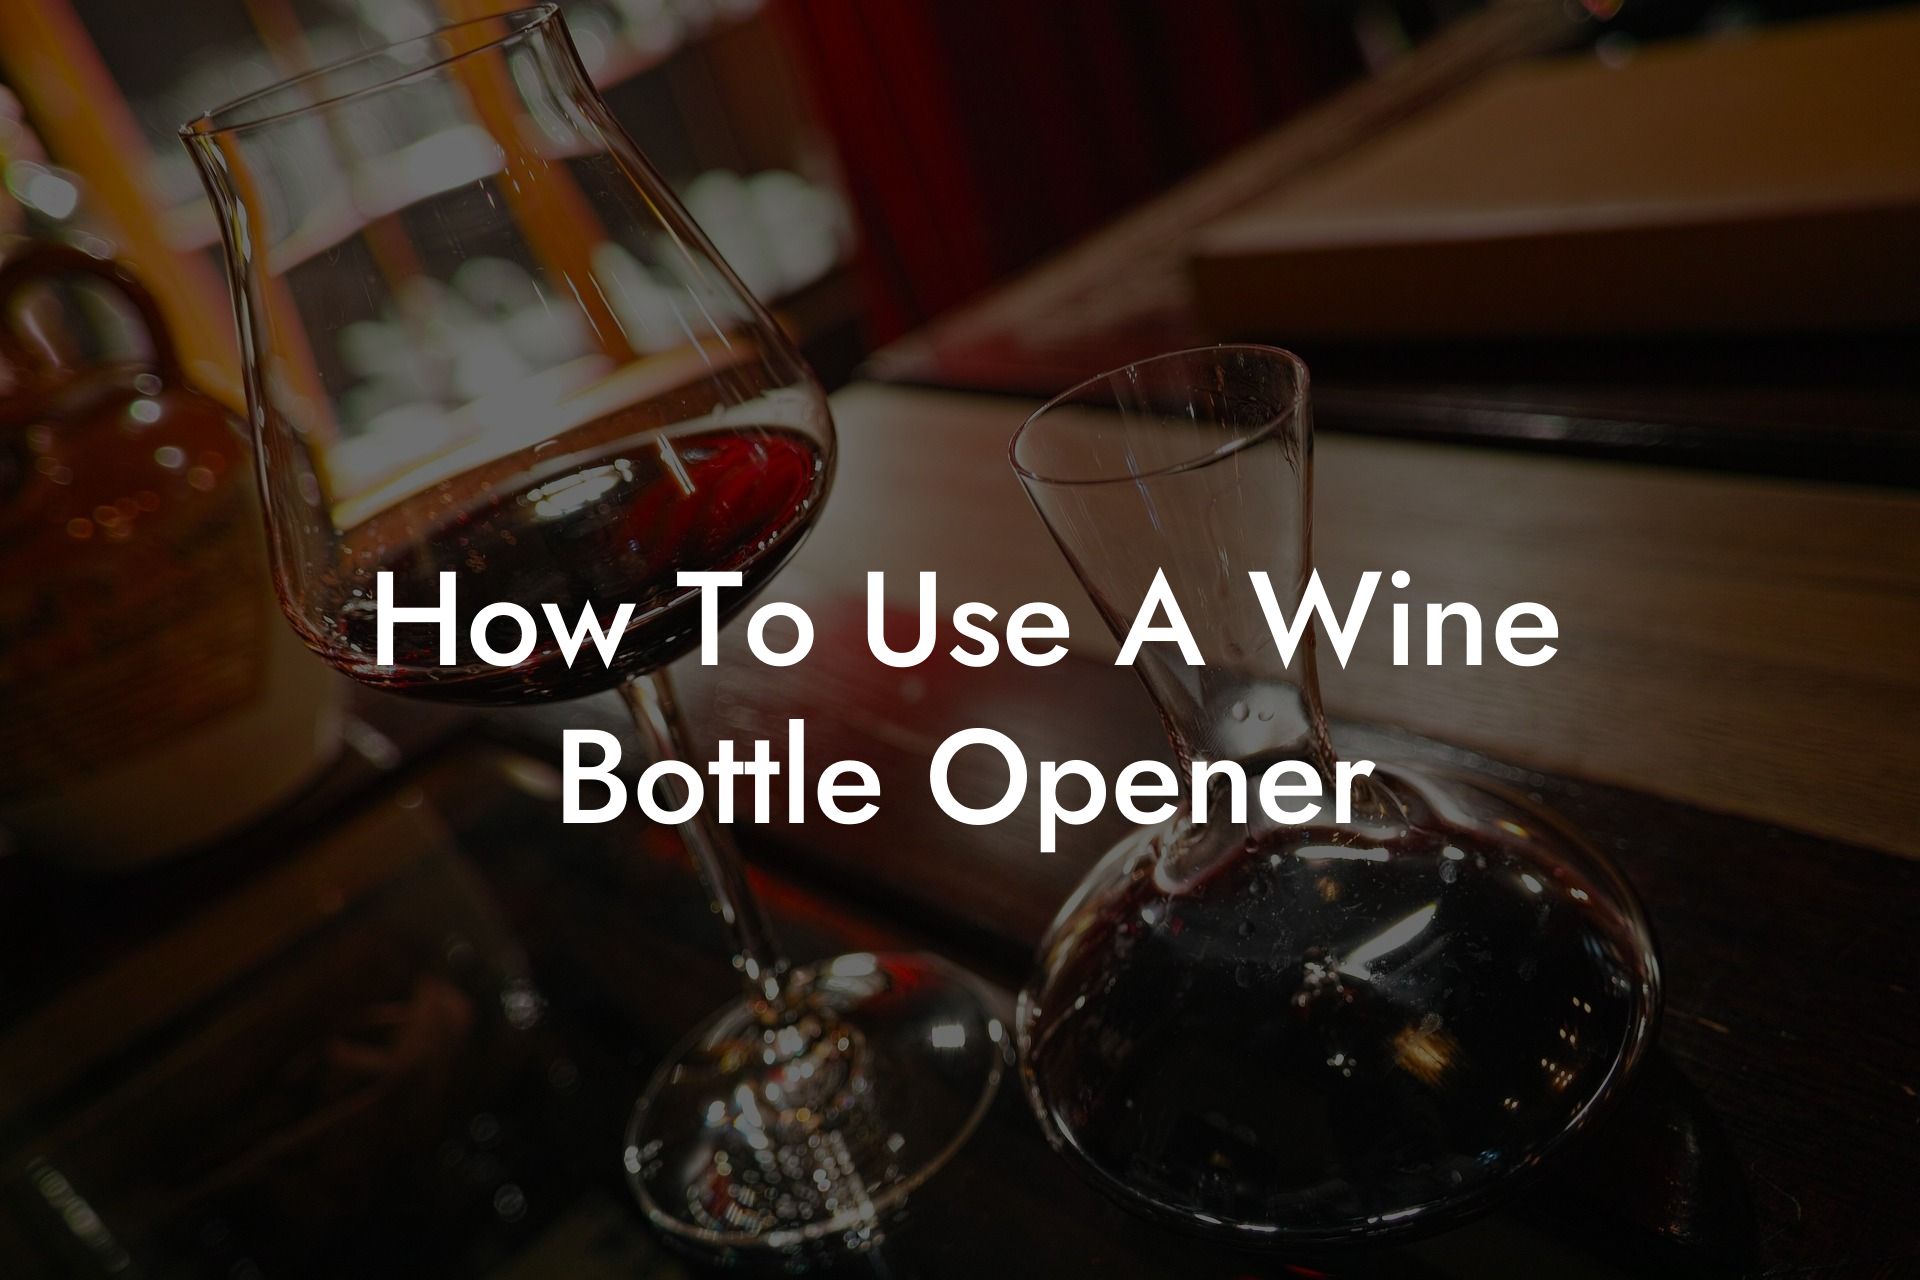 How To Use A Wine Bottle Opener